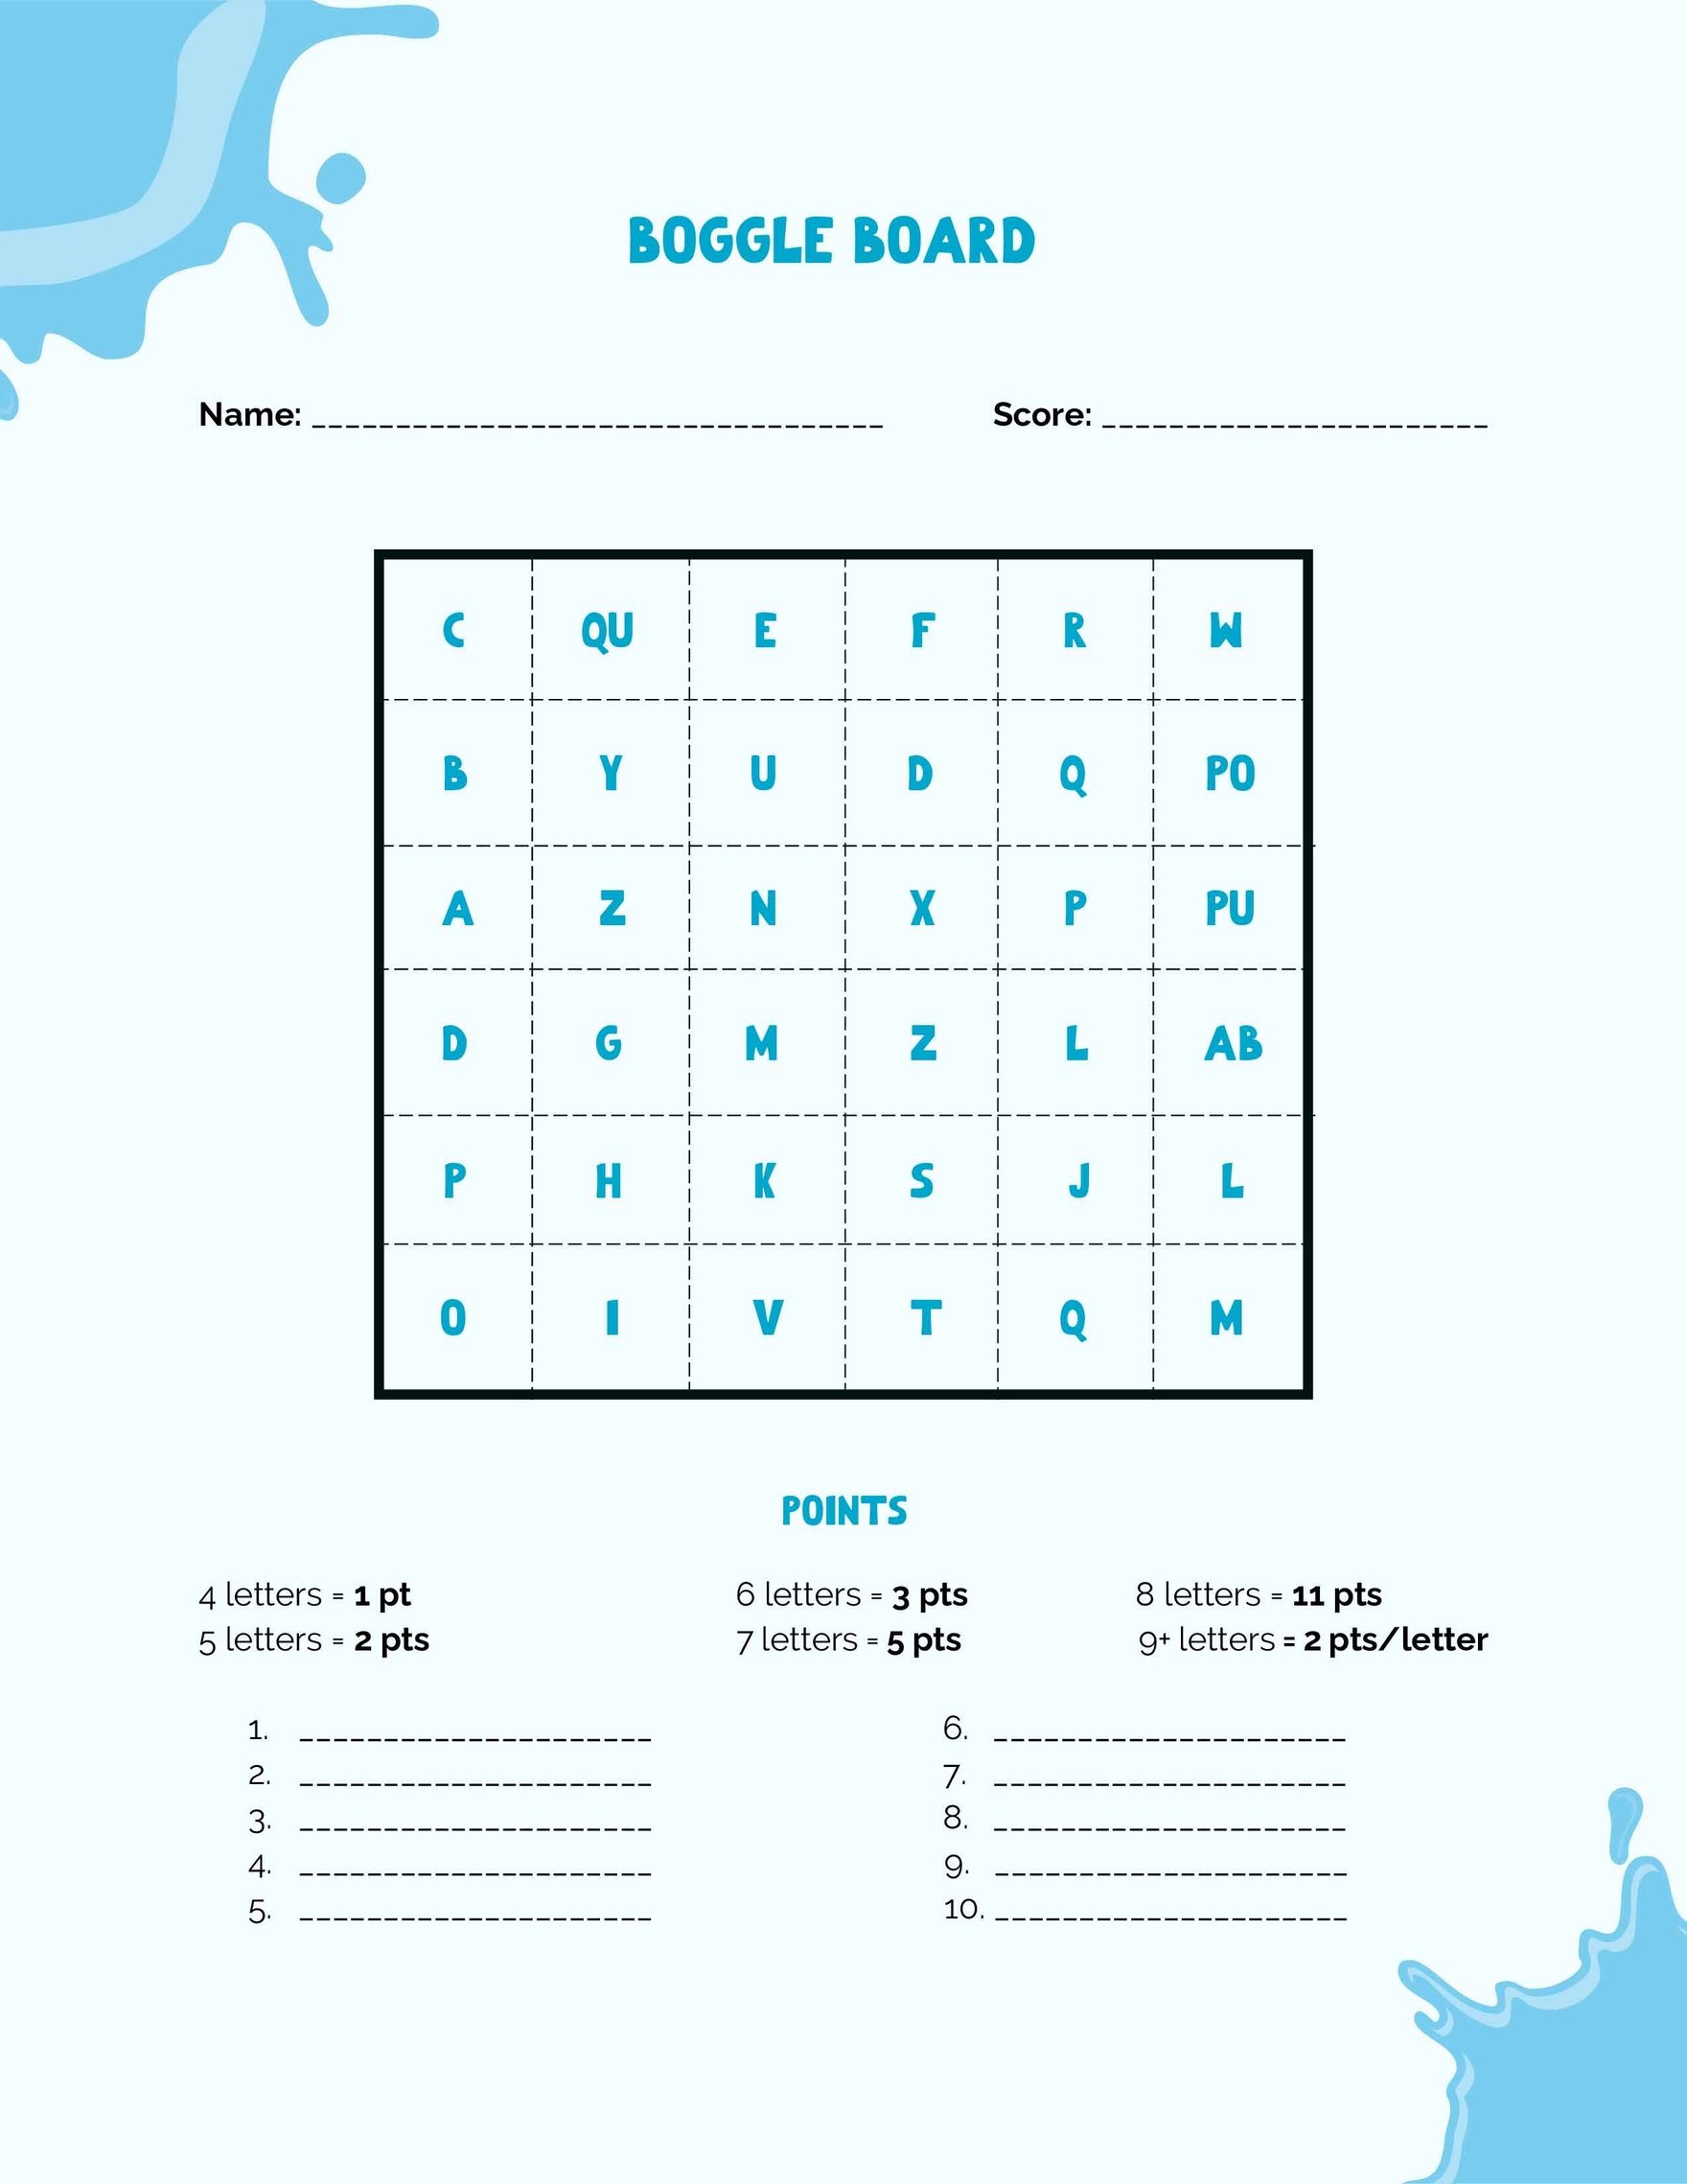 Free Boggle Board Template in Word, Google Docs, PDF, Apple Pages